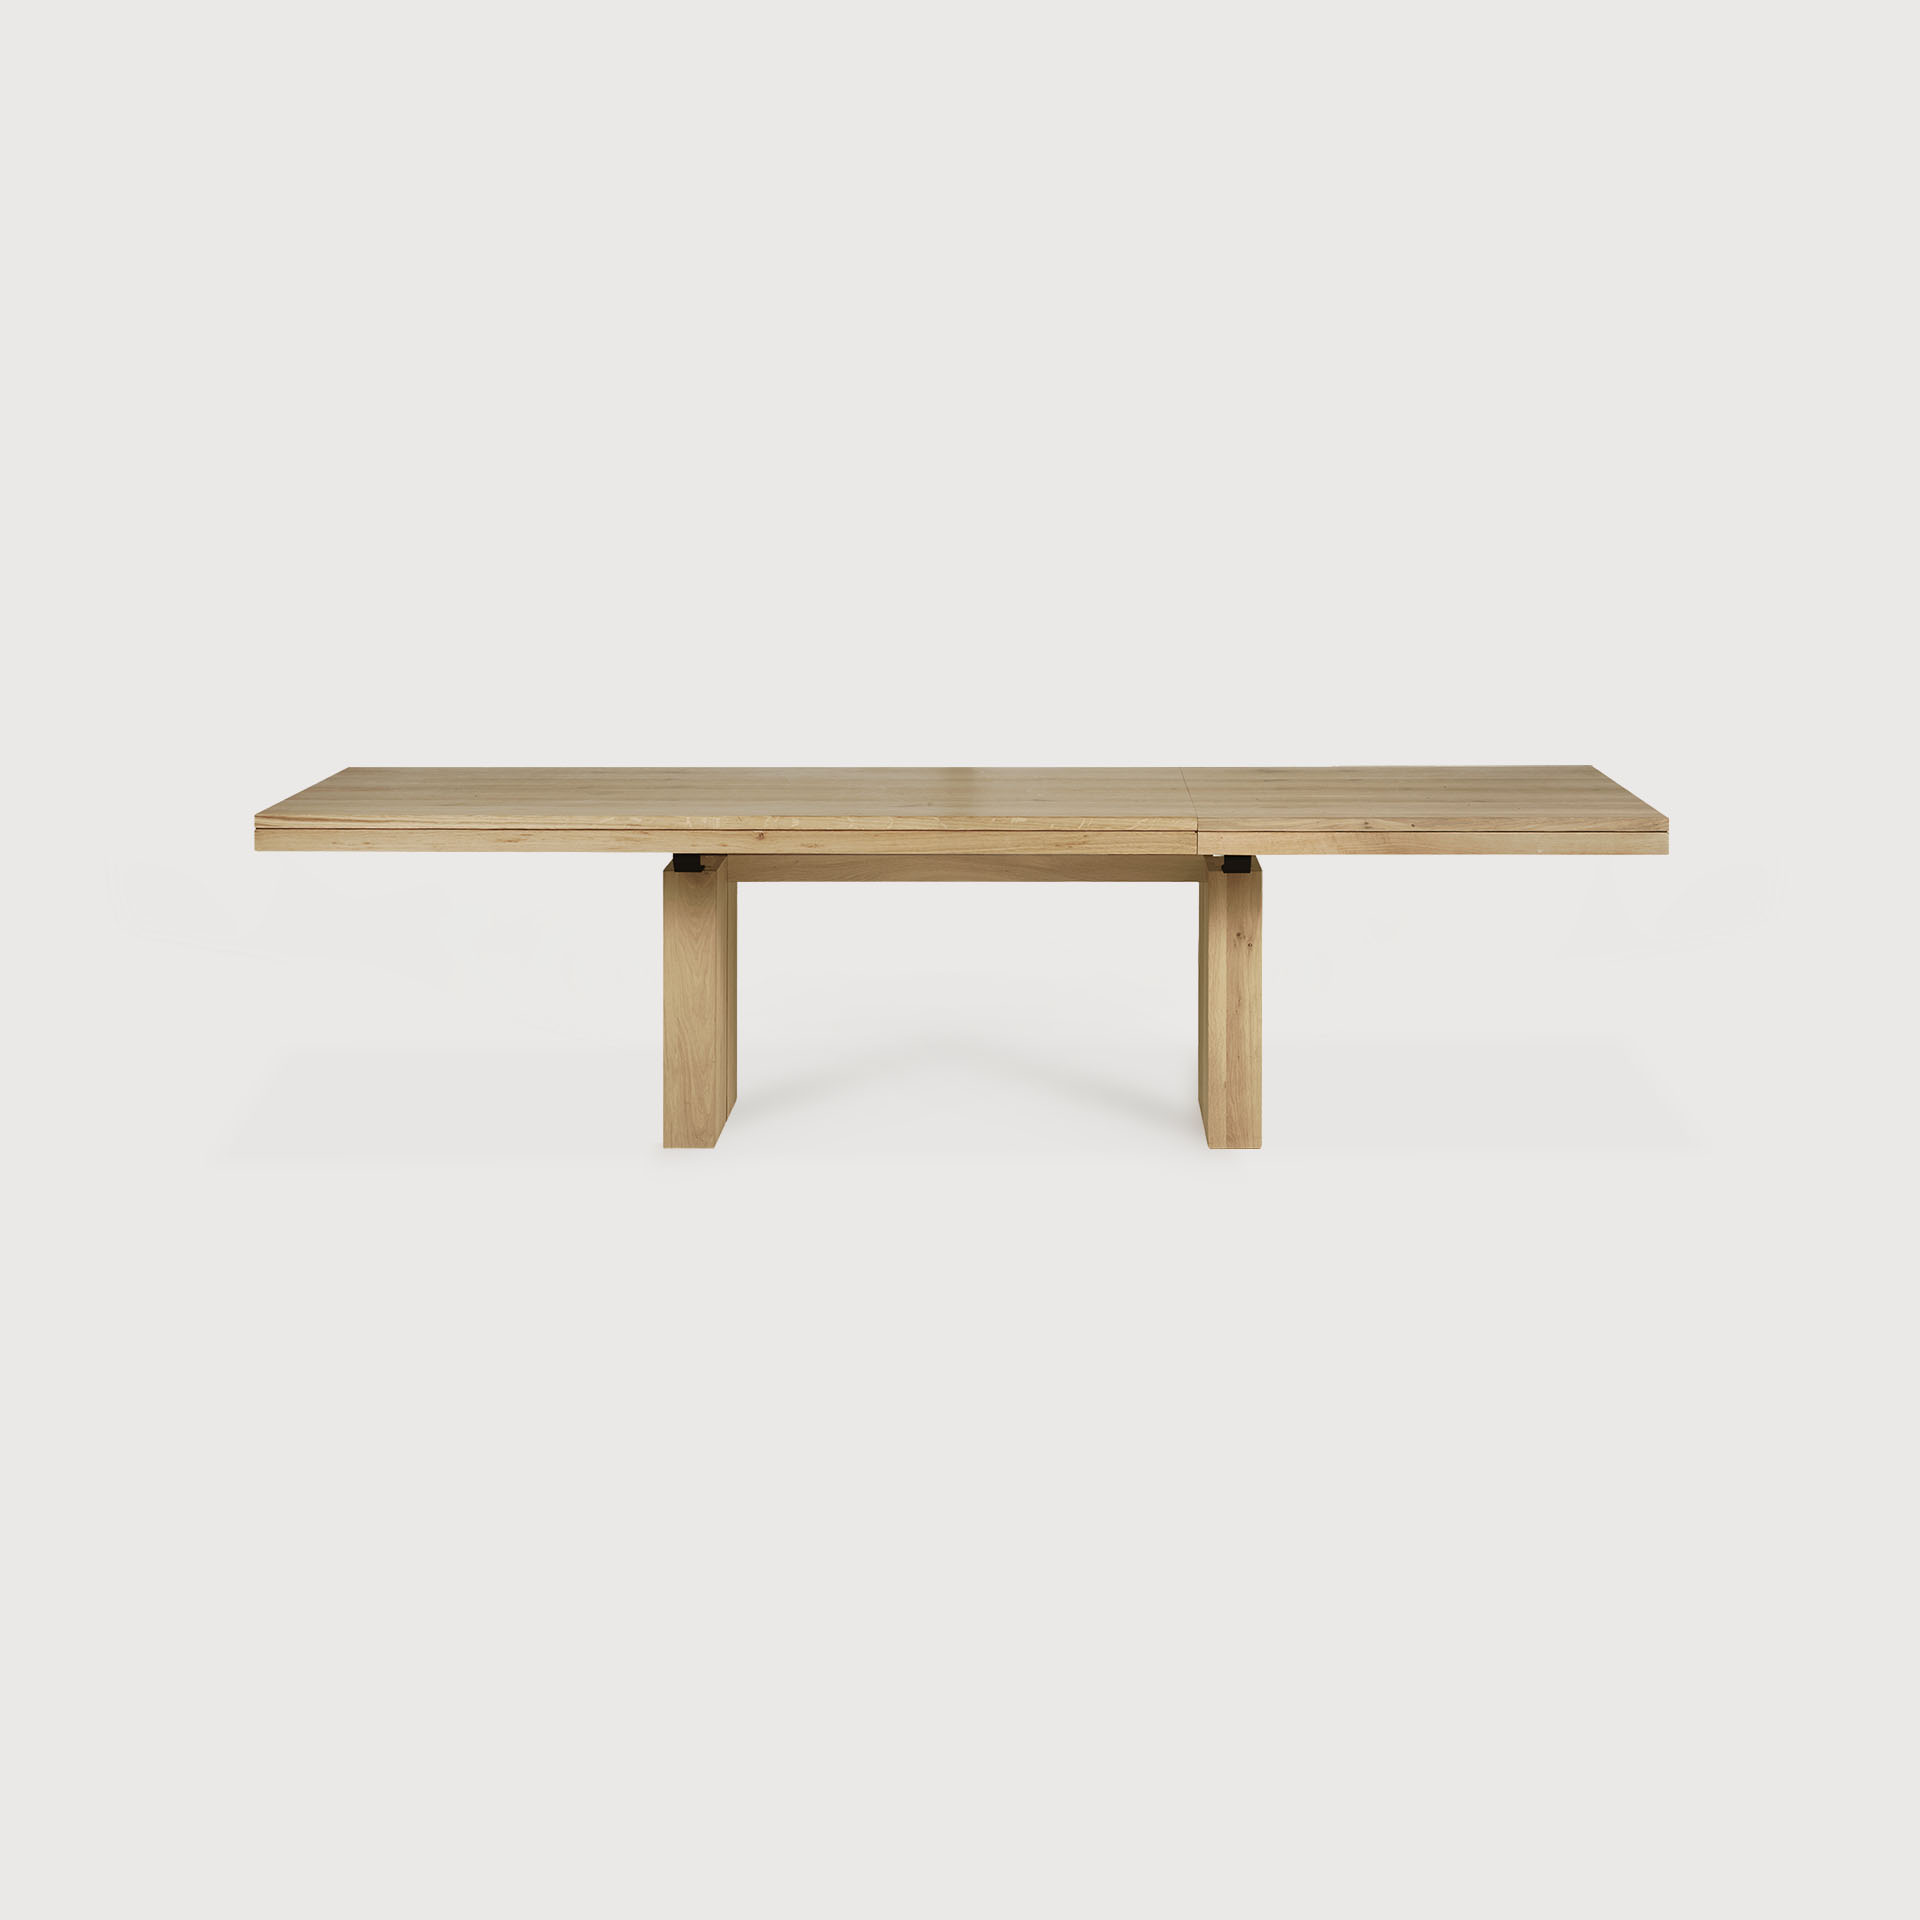 [52066*] Oak Double extendable dining table